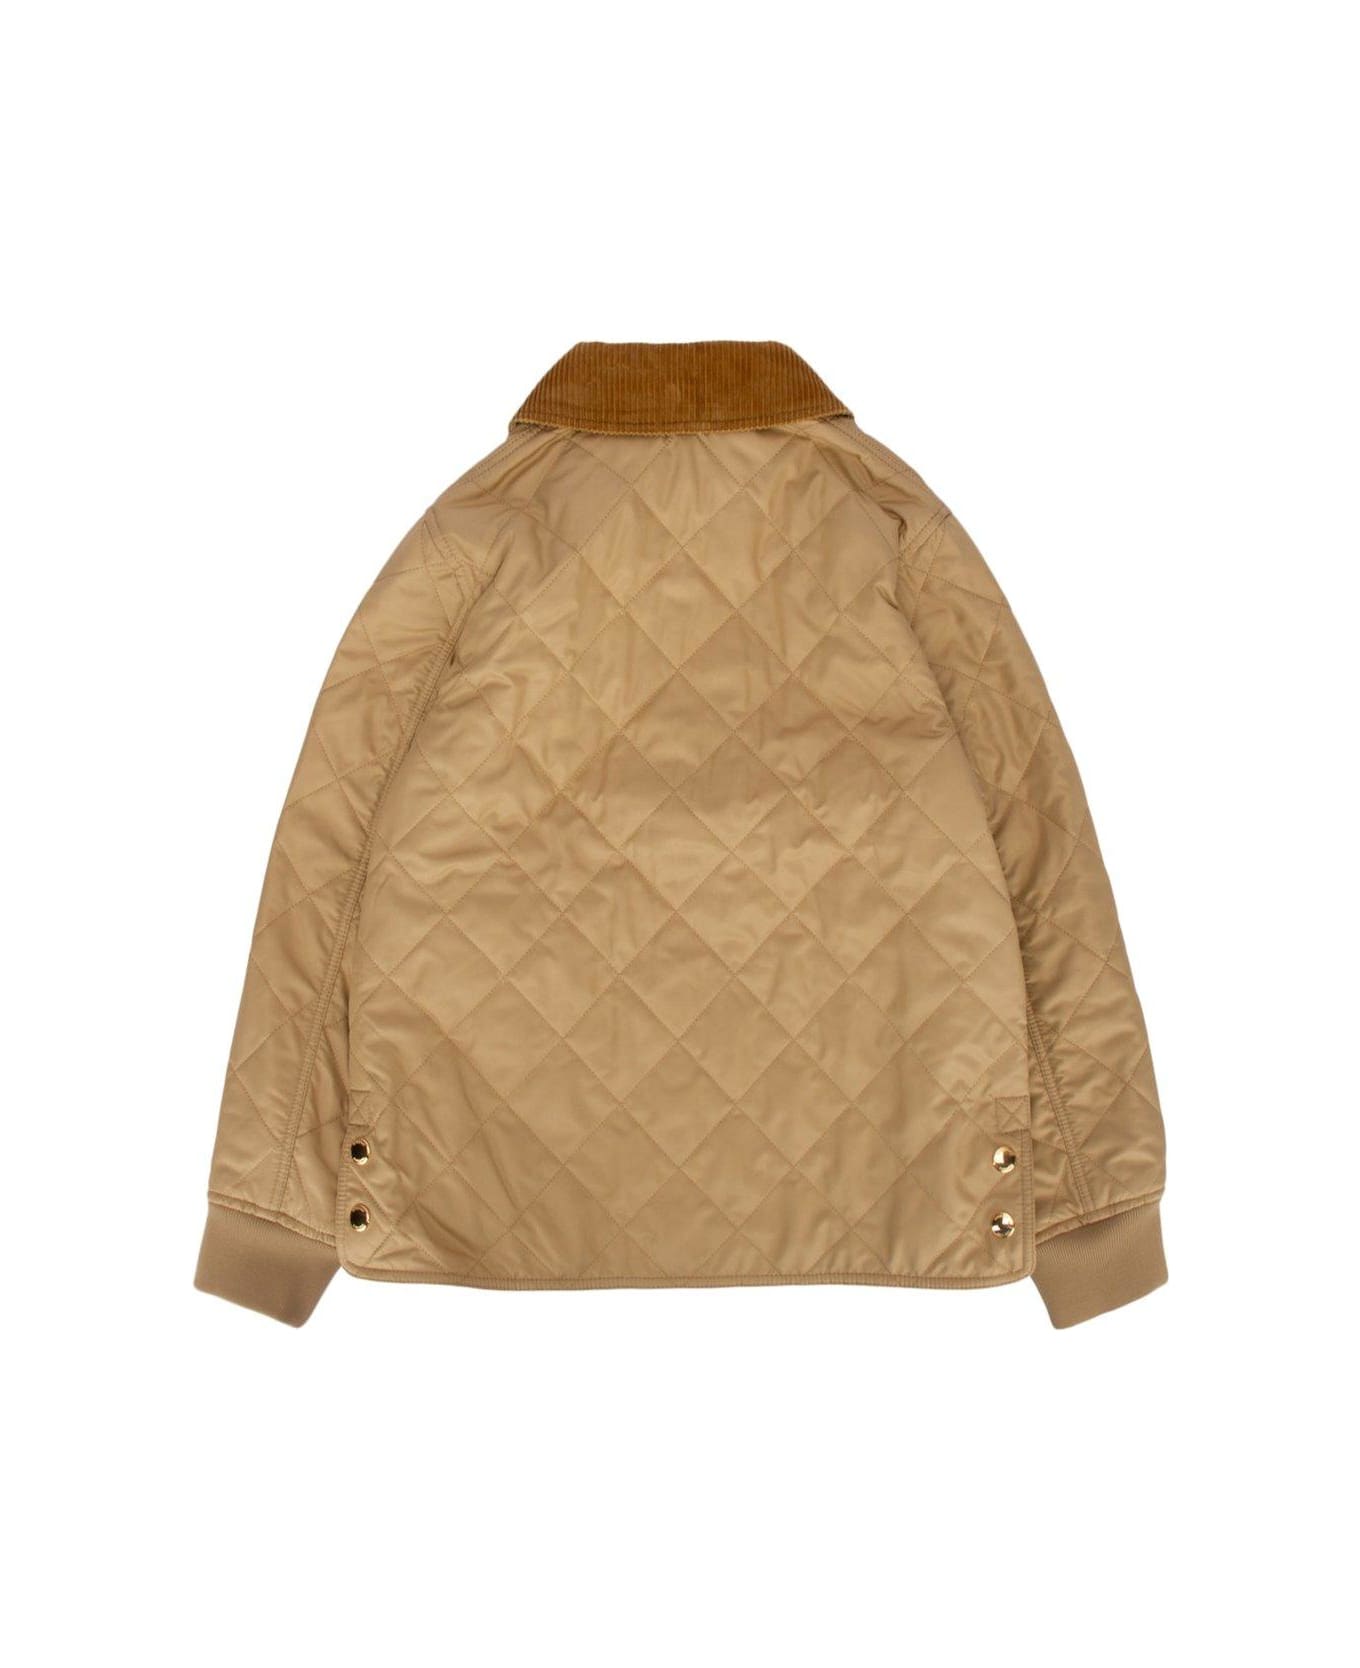 Burberry Quilted Zipped Jacket - Archive beige